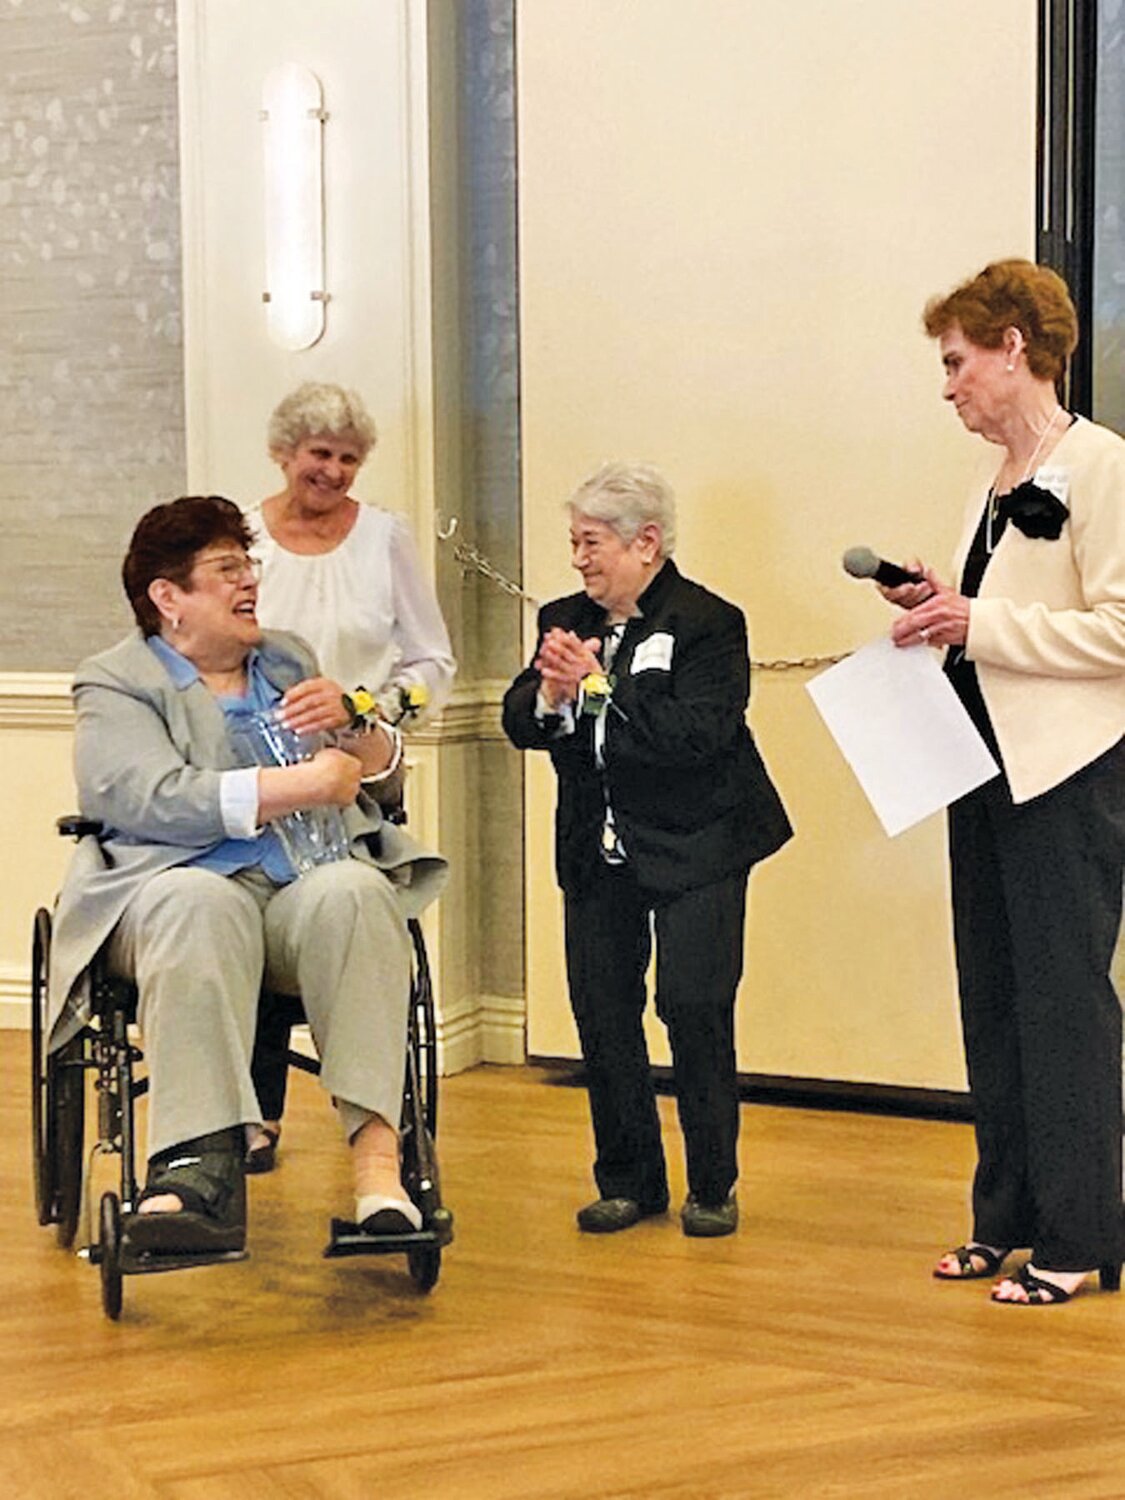 Deb Nerviano is presented with the 2023 Woman of the Year Award from the Ladies of Mount Carmel during the annual Communion Breakfast, held recently at the Bucks Club. With her are Carol Guckavan, Mona Kaminski and Mary Lou Gehring, former recipients of the award.